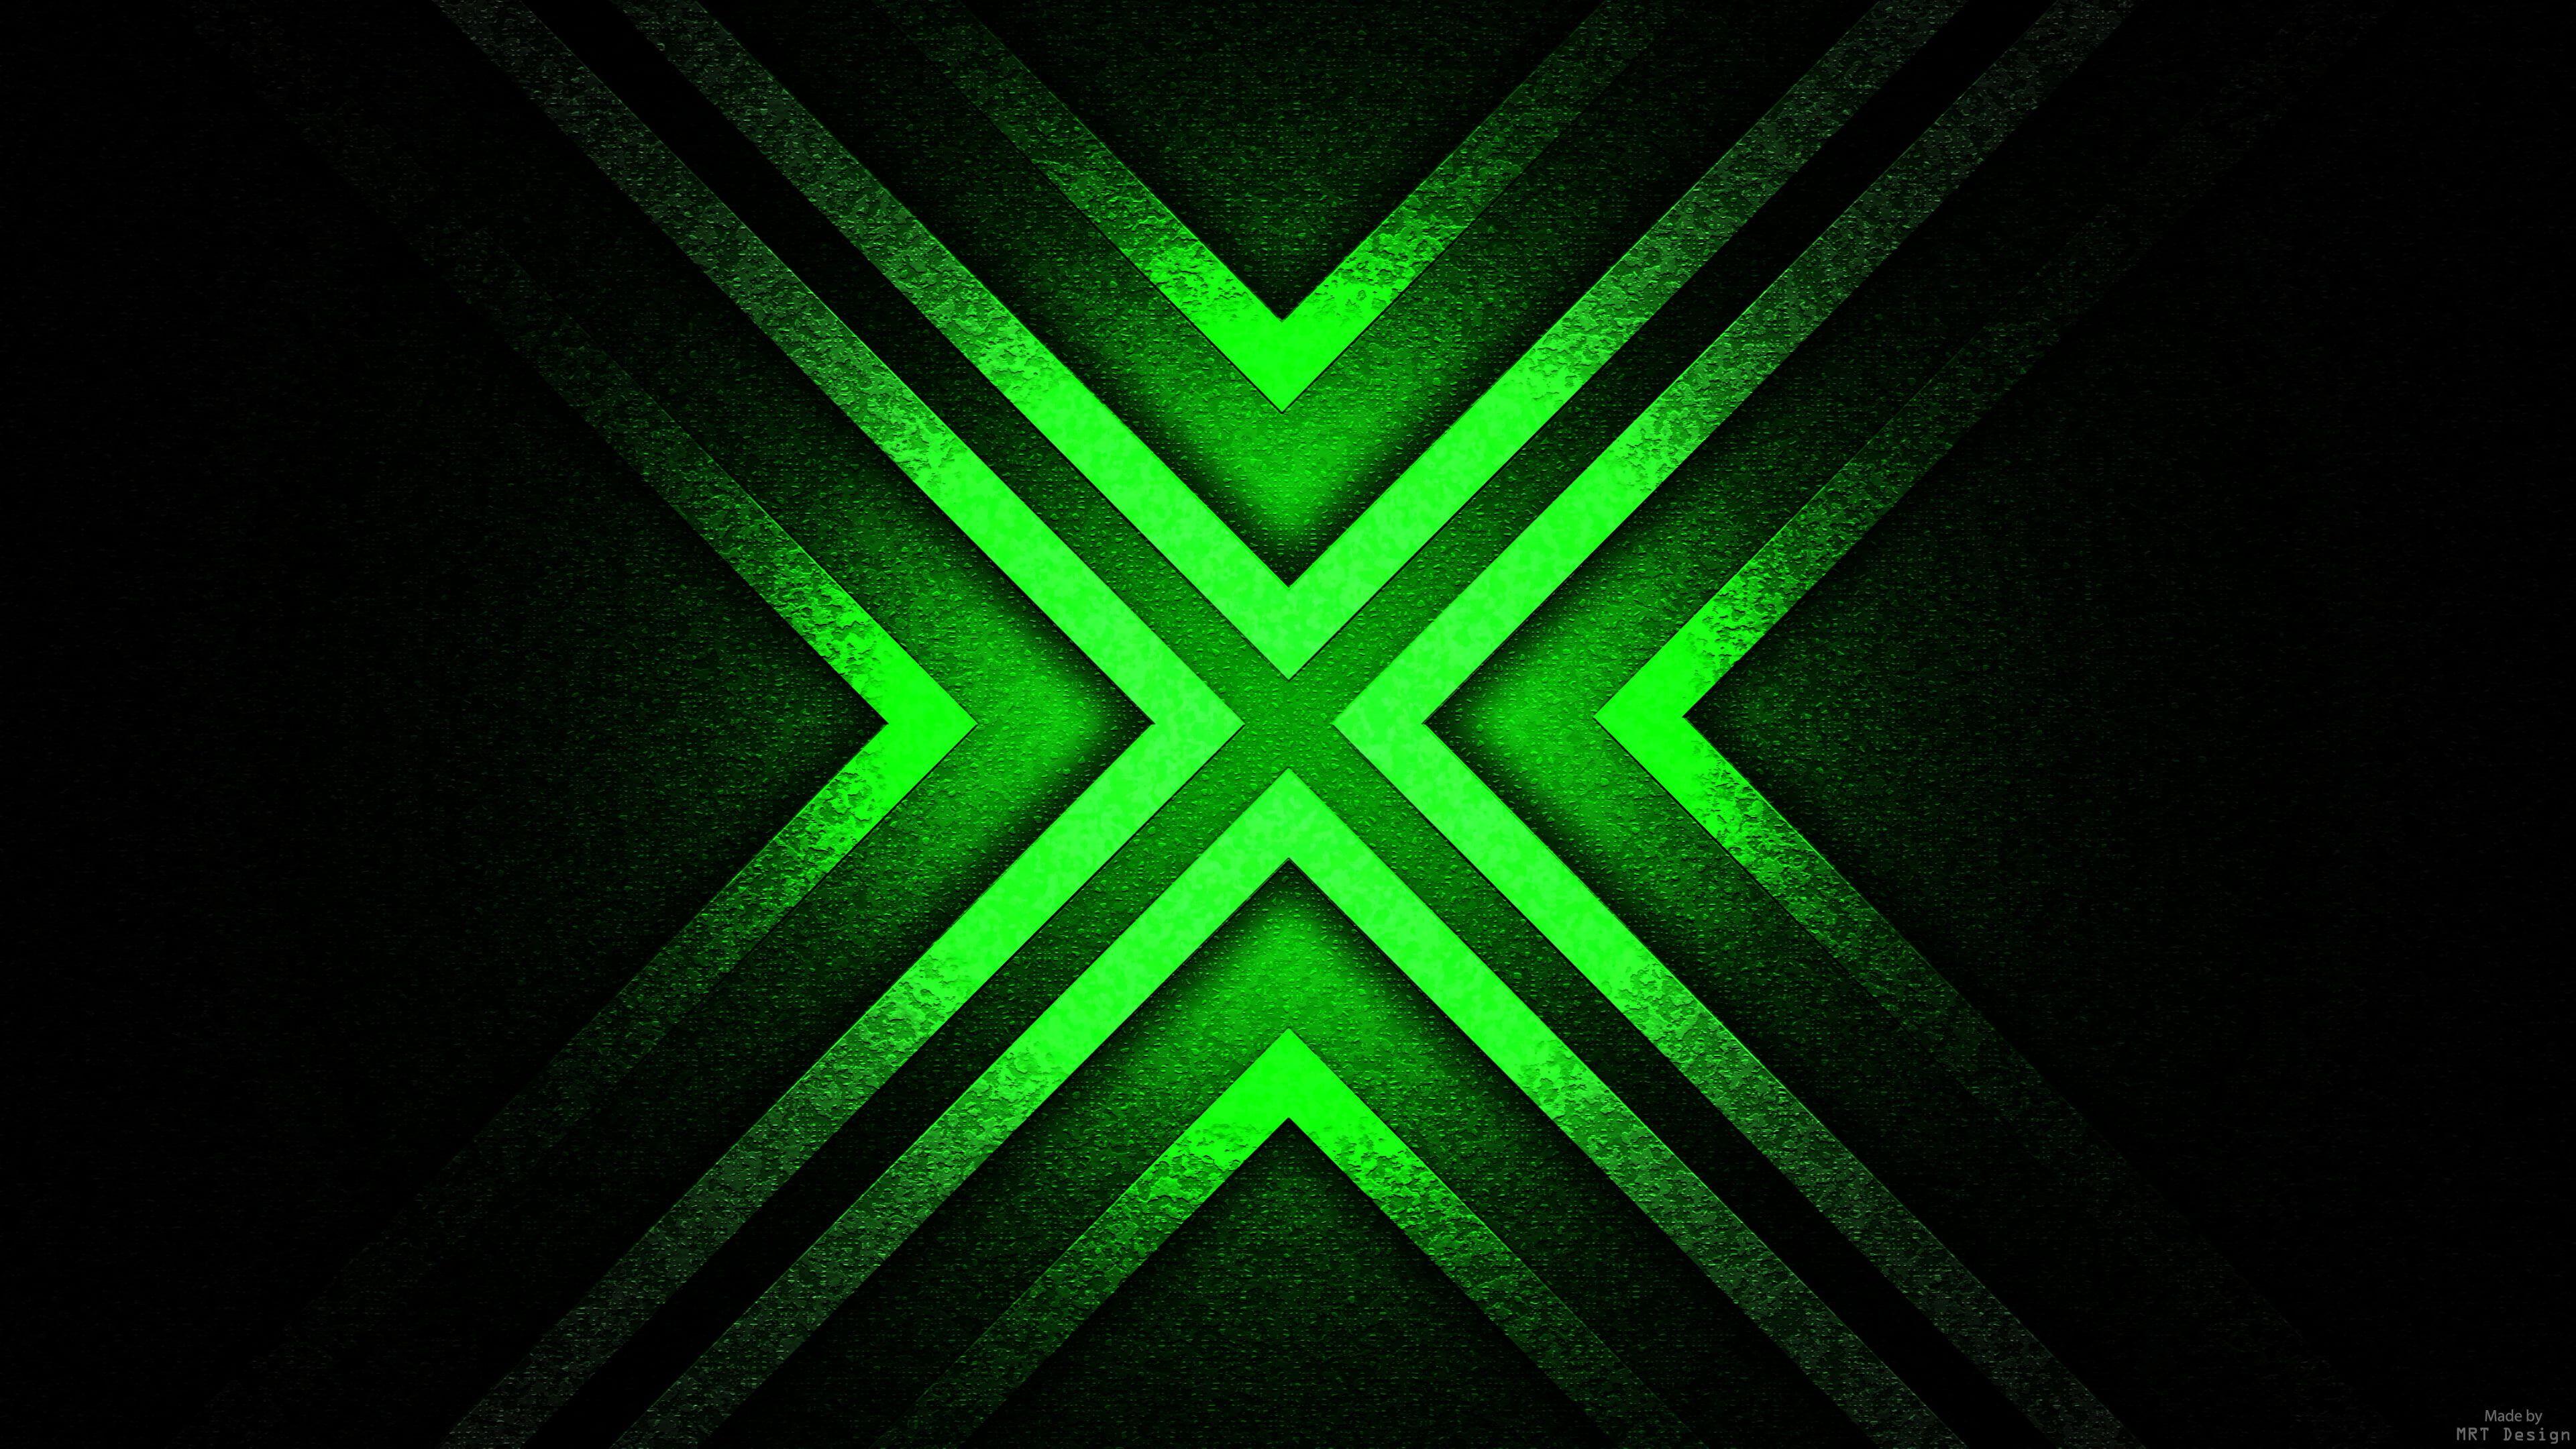 Green and Black Abstract Wallpapers - Top Free Green and Black Abstract